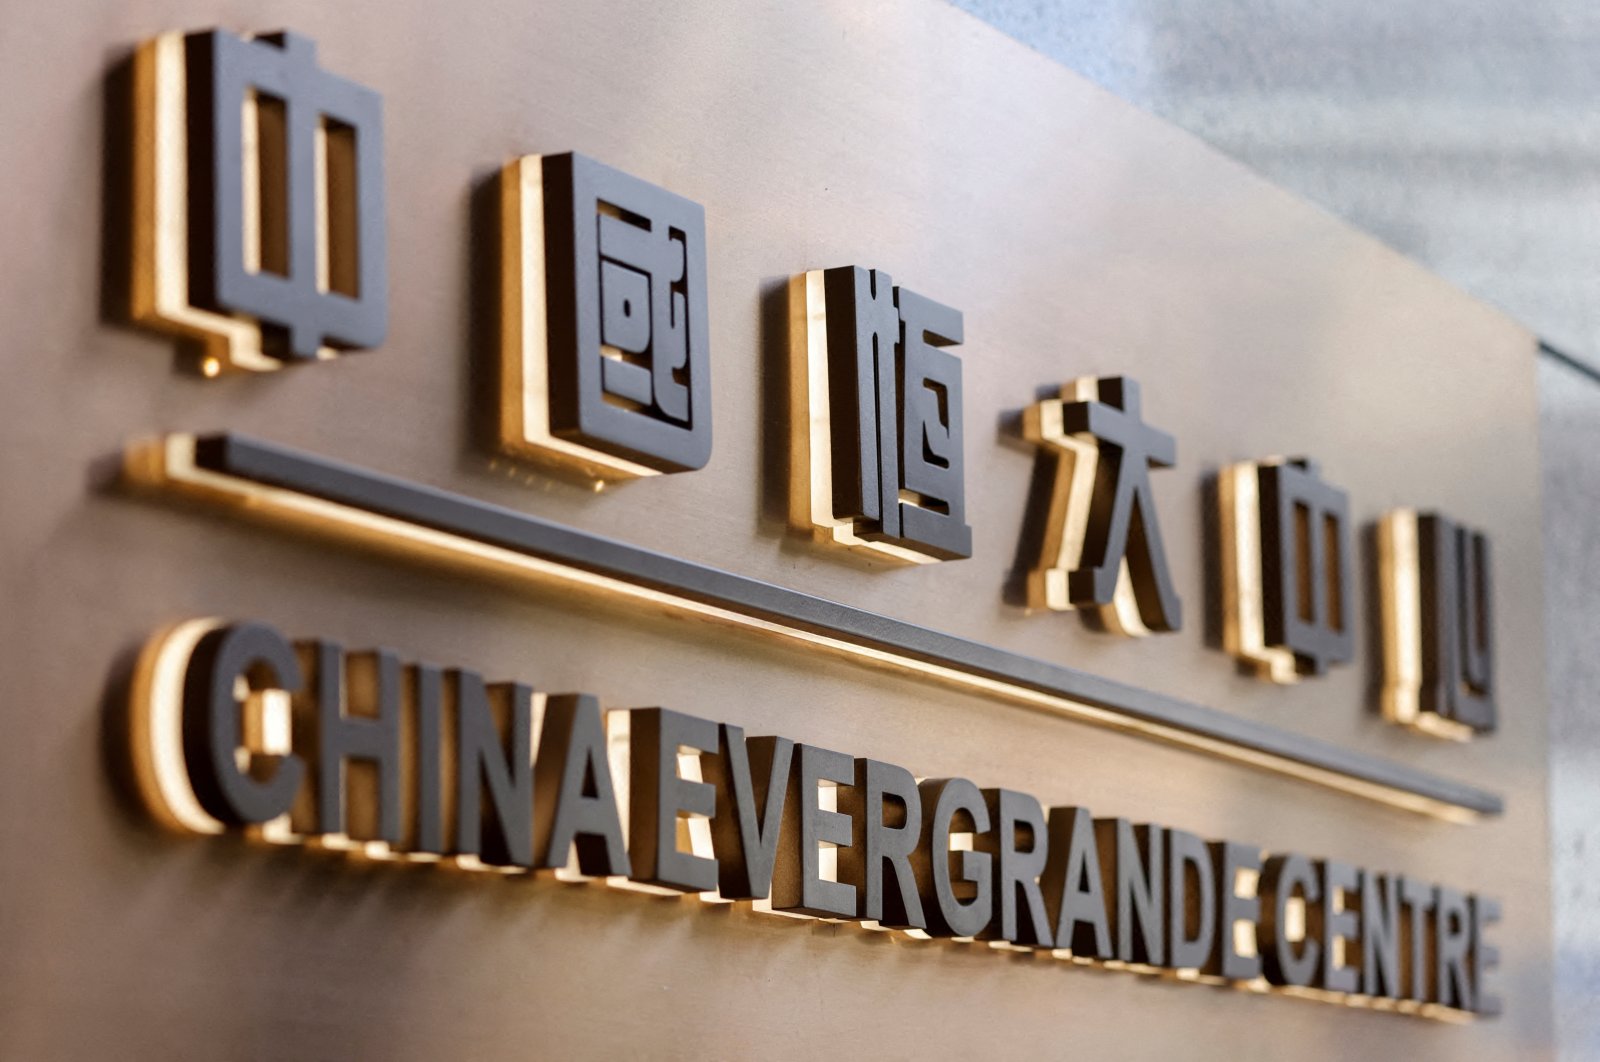 The China Evergrande Centre building sign is seen in Hong Kong, Dec. 7, 2021. (Reuters Photo)